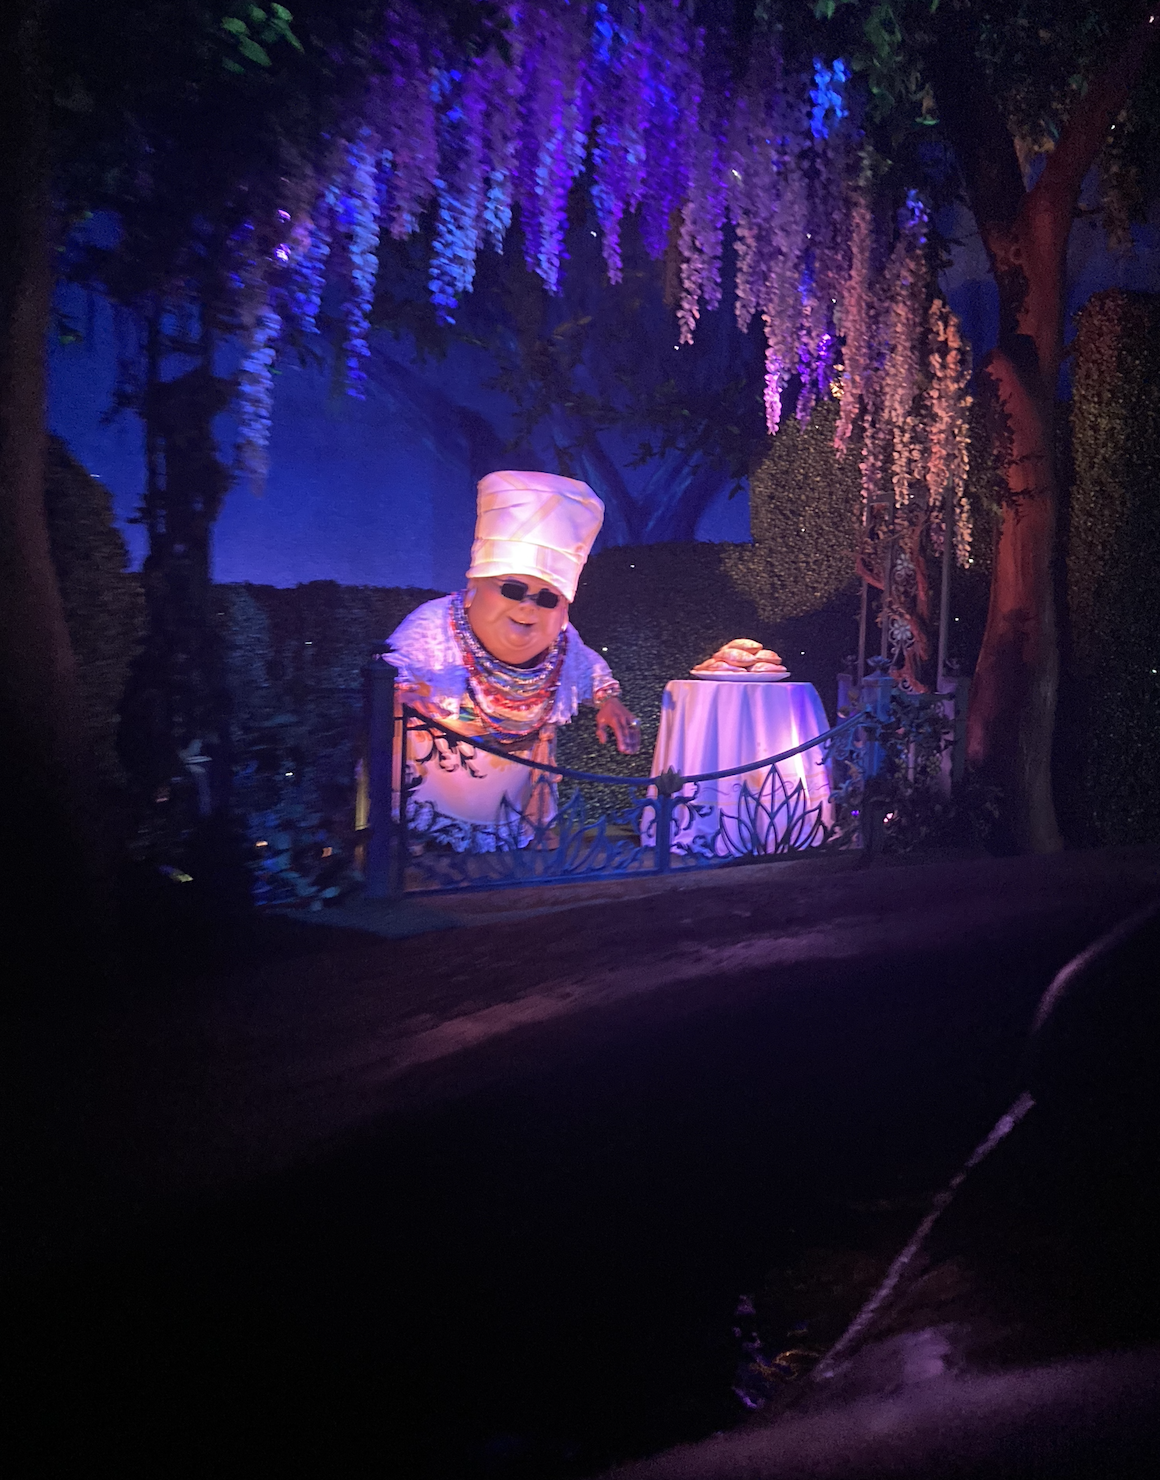 Chef Gusteau from Ratatouille is joyfully leaning over a table in a scenic, whimsical outdoor setting with hanging flowers